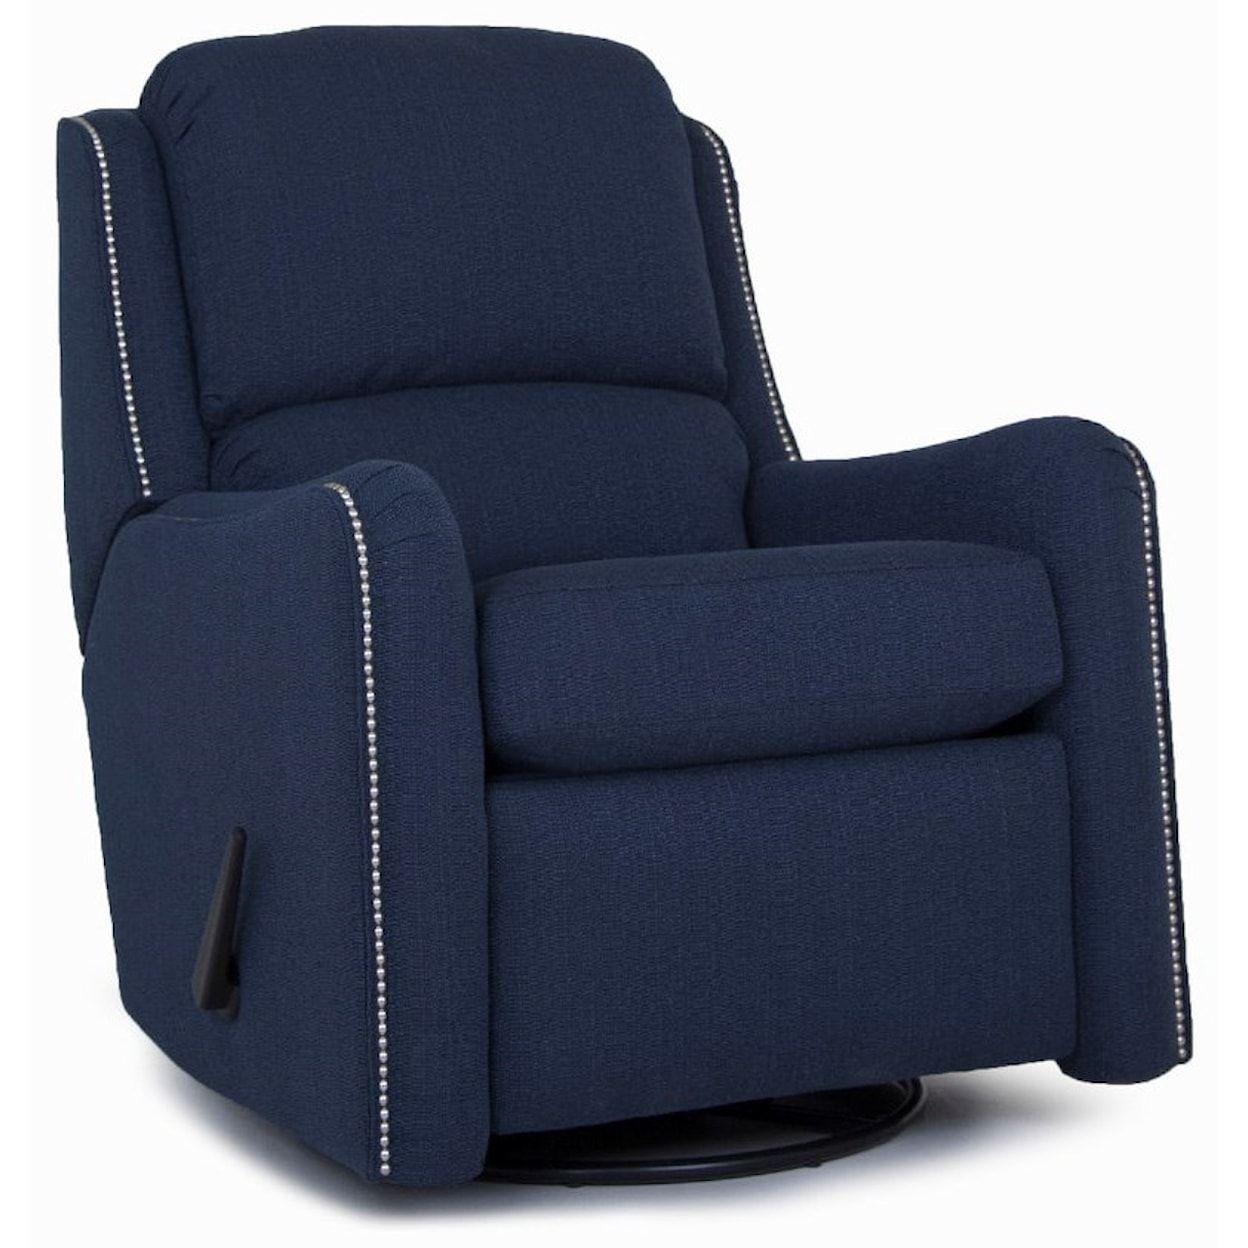 Smith Brothers 746 Power Swivel Glider Recliner